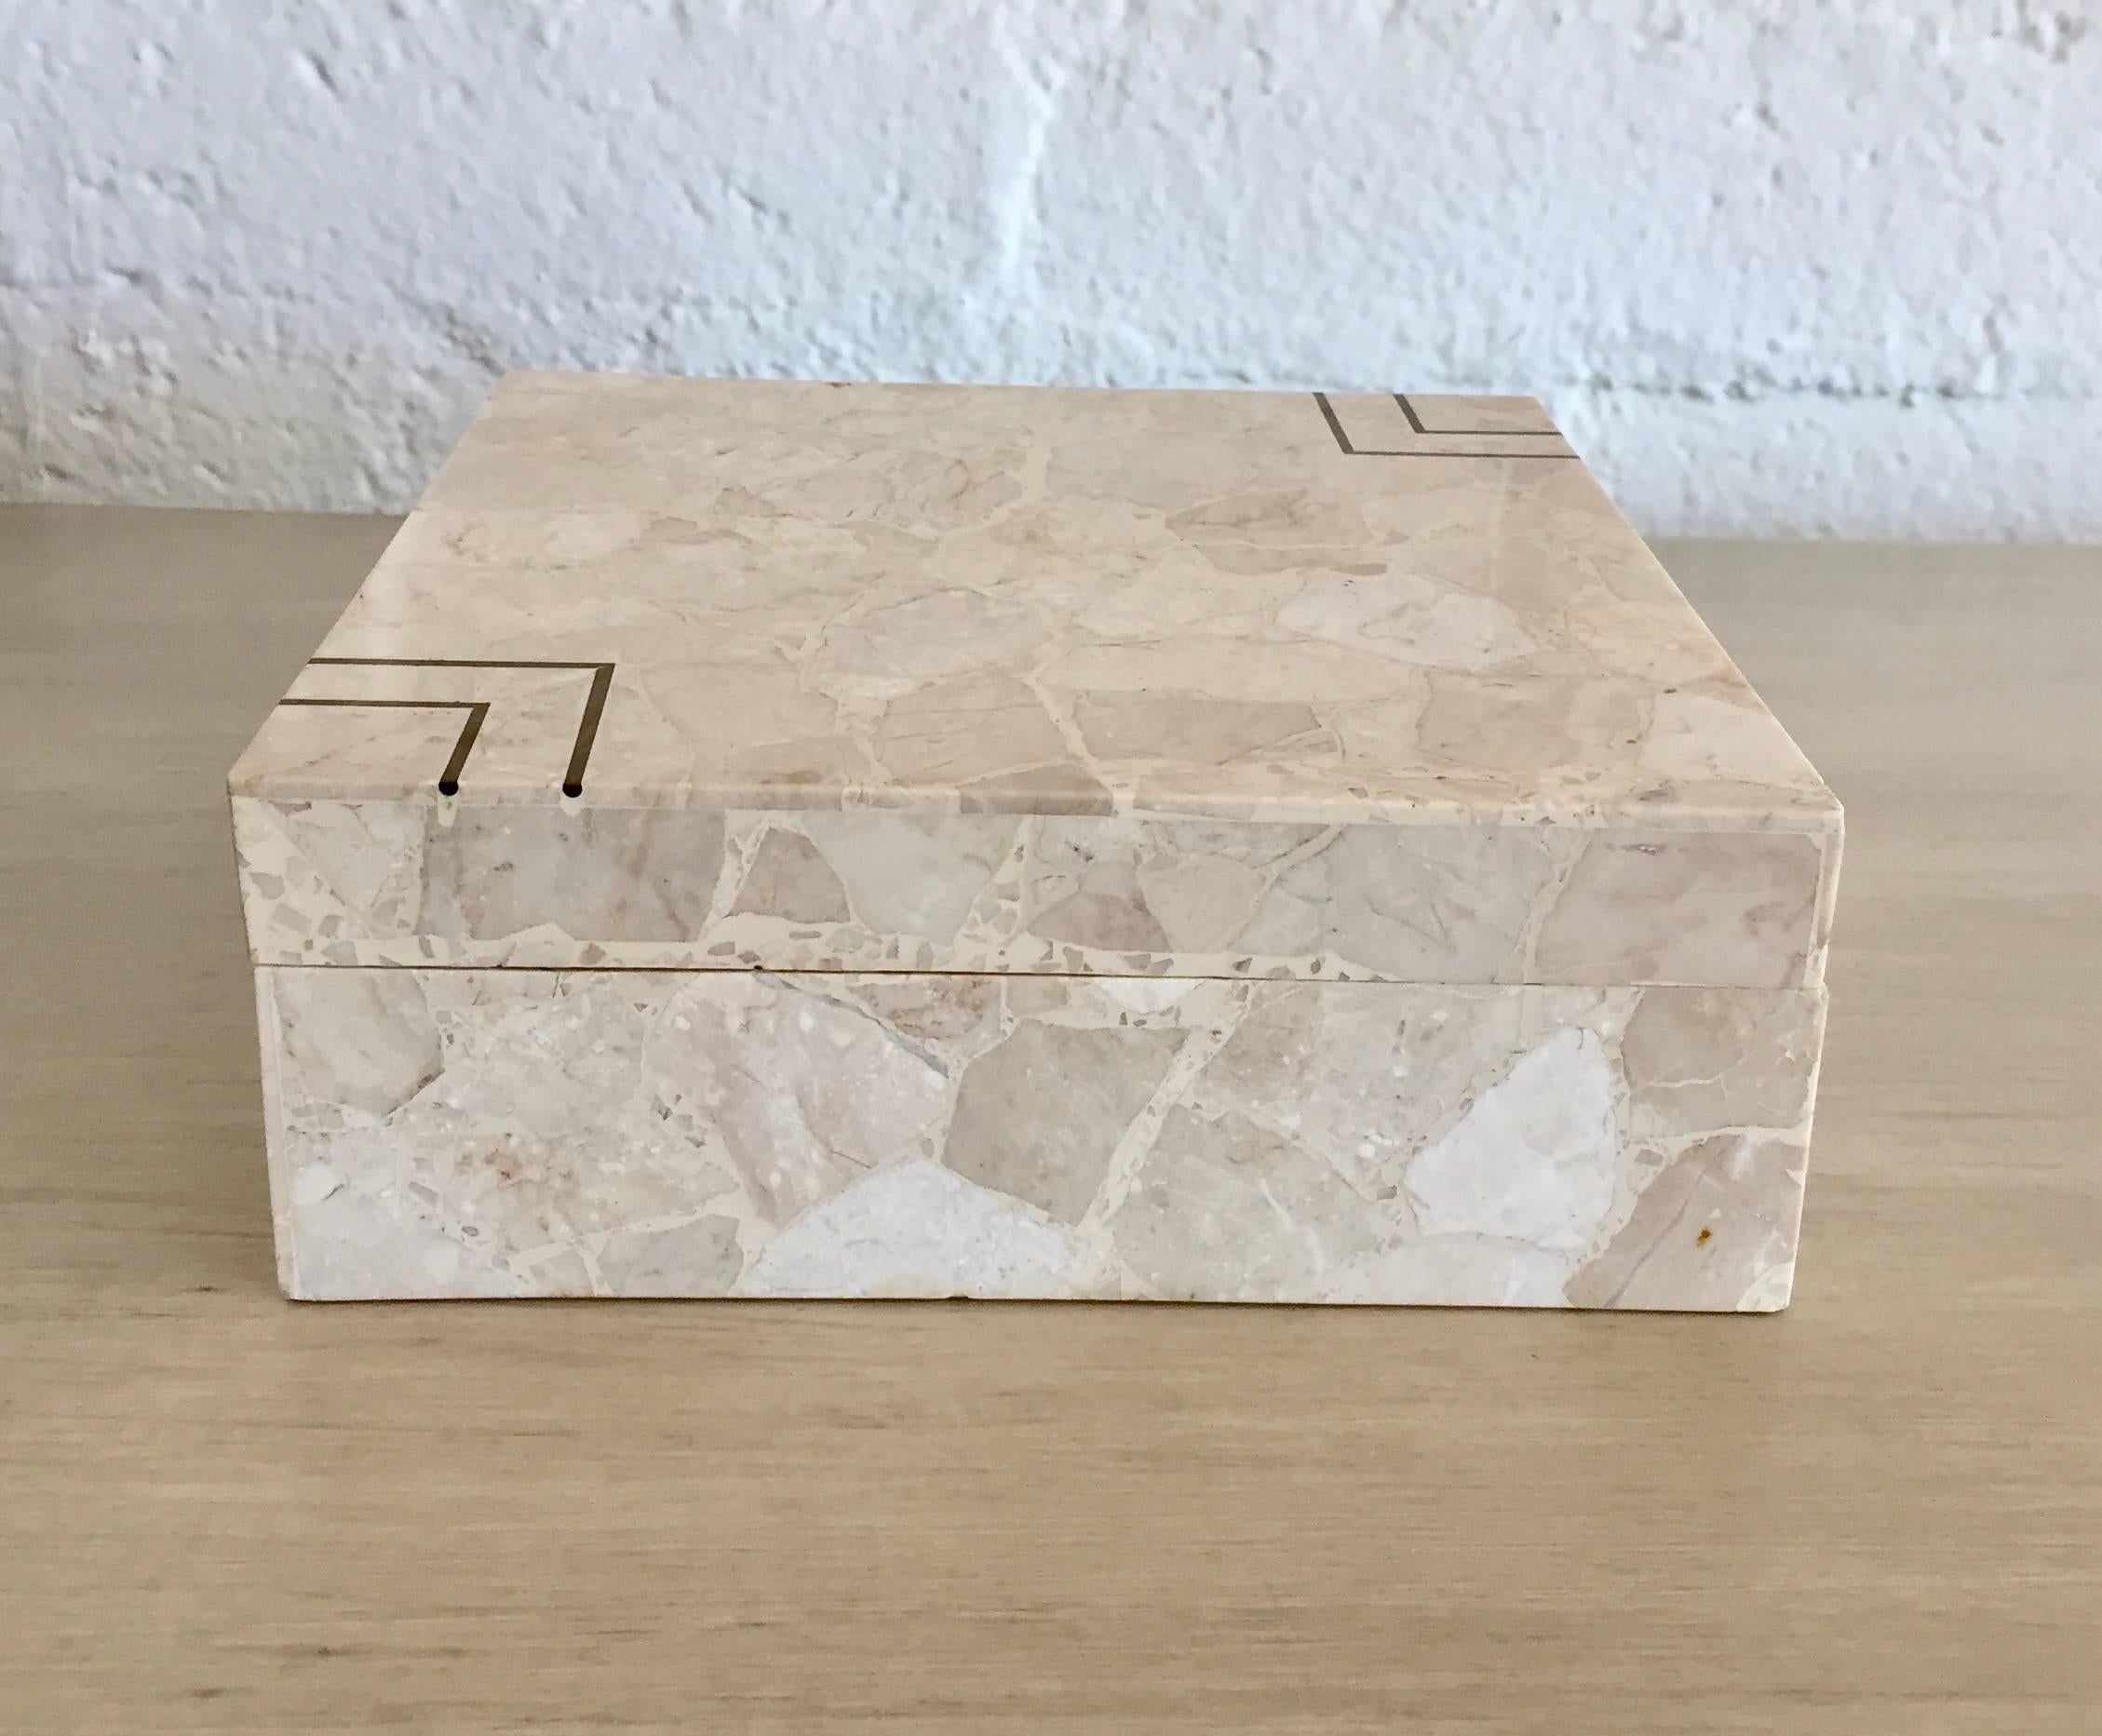 A handsome square stone box made of terrazzo and inlaid brass. The terrazzo has beautiful light and greyish pieces of marble stone throughout. The box is lined with cream felt and is also felted at the bottom.